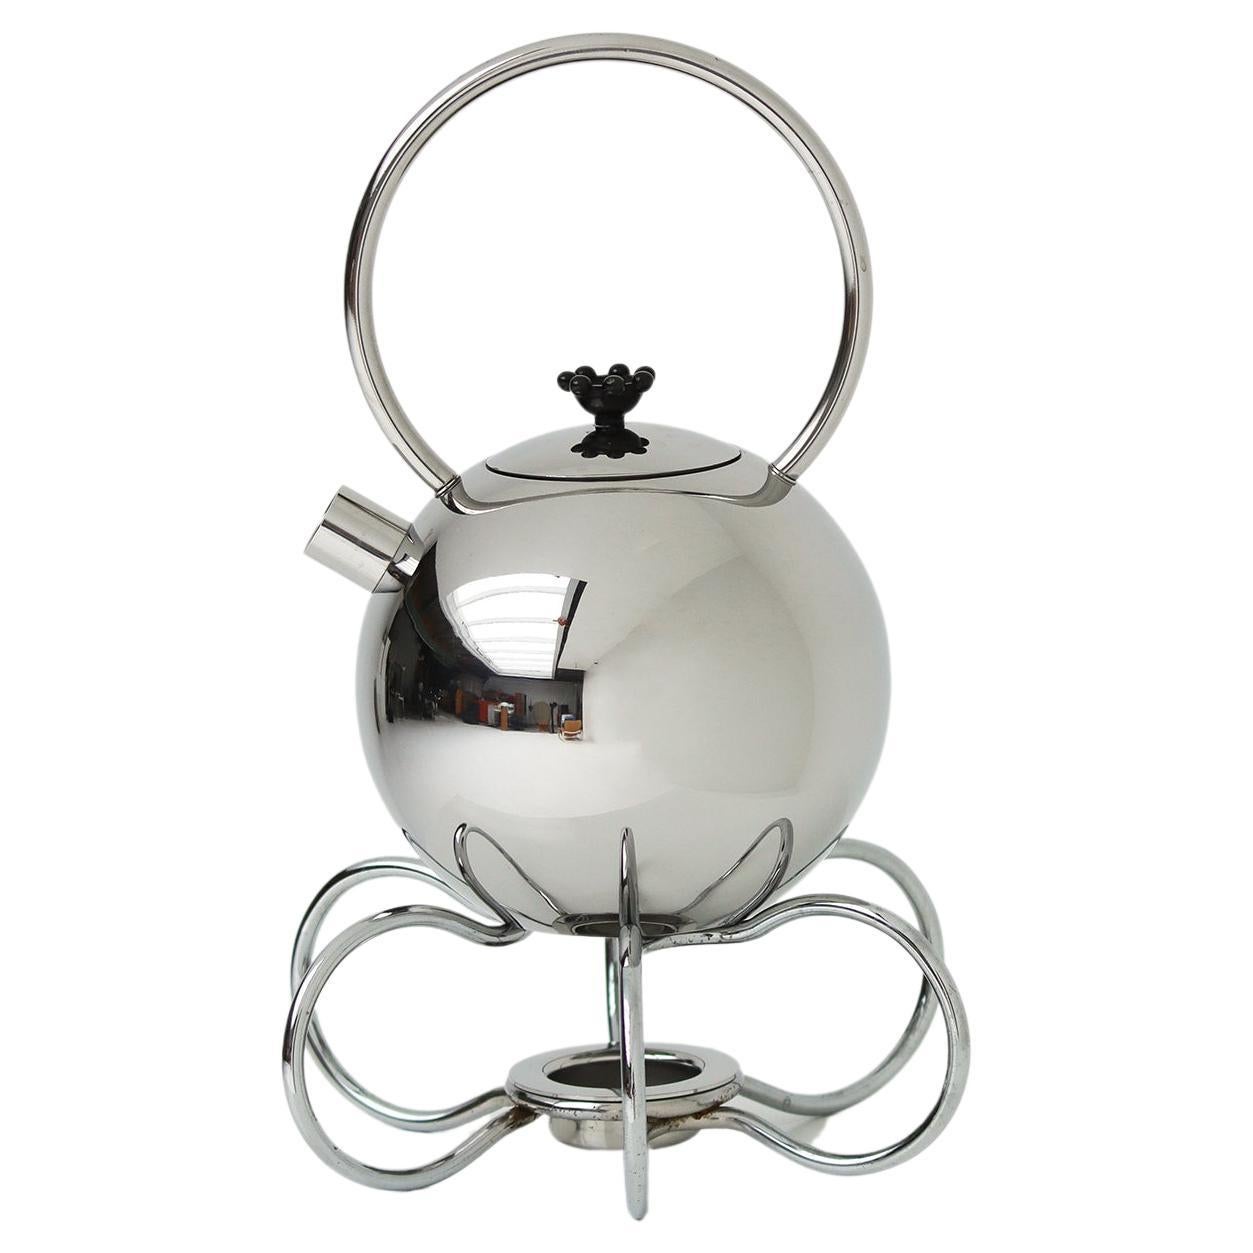 Midcentury modern chrome Teapot from the King Series of Wmf by Matteo Thun 1989 For Sale